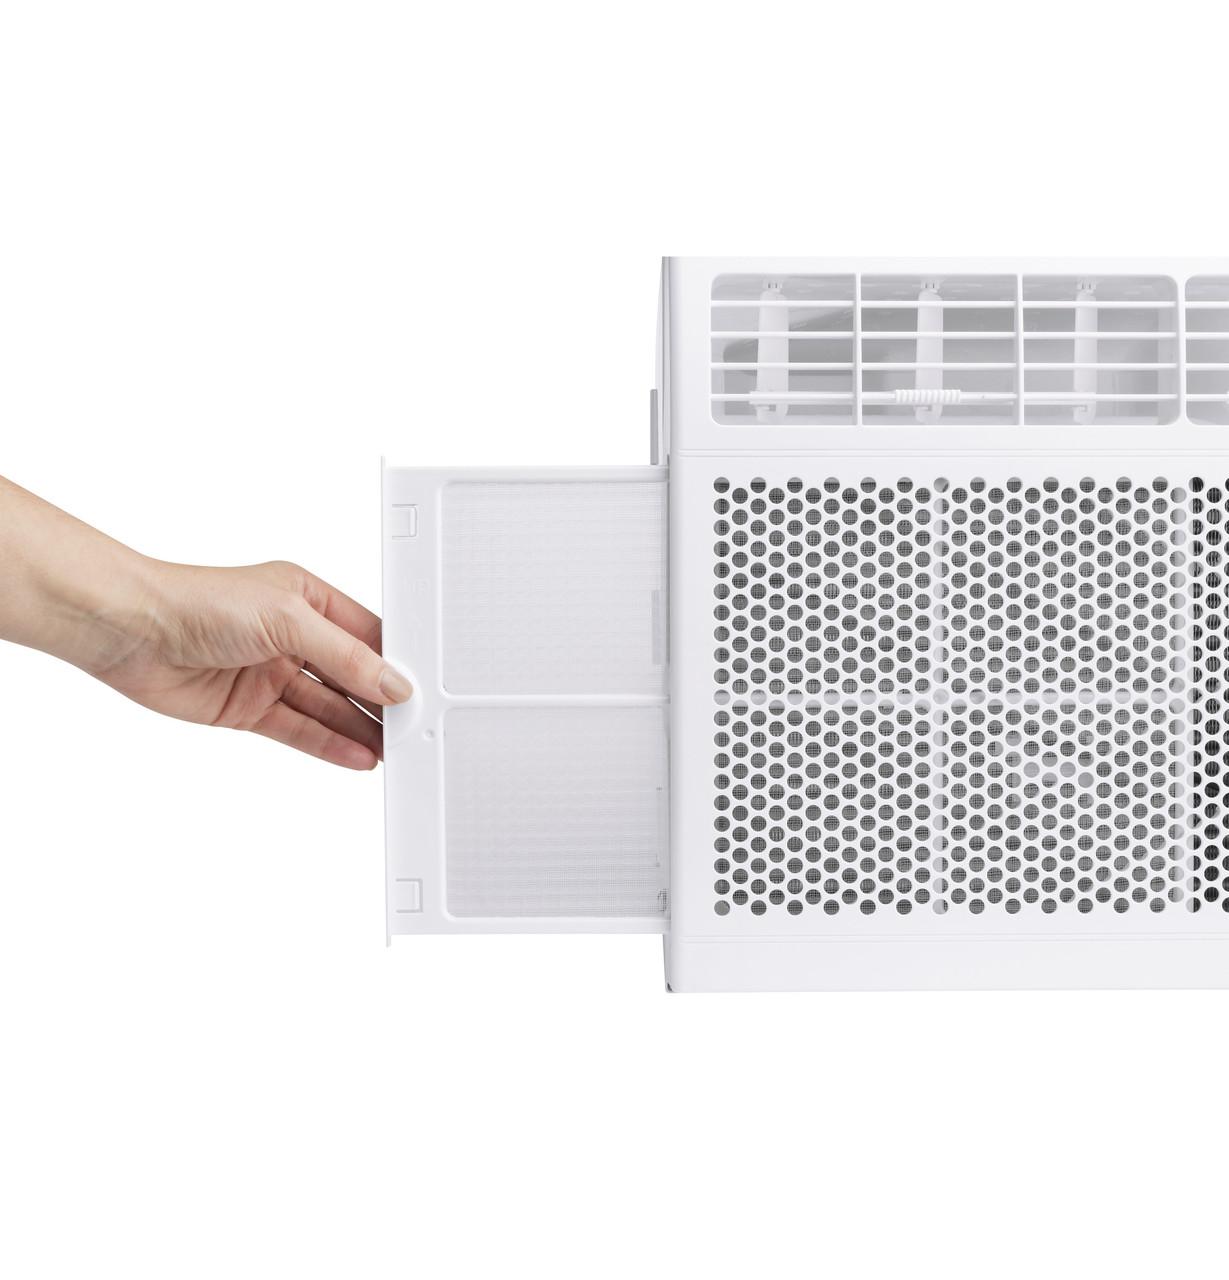 Haier 115 Volt Electronic Room Air Conditioner